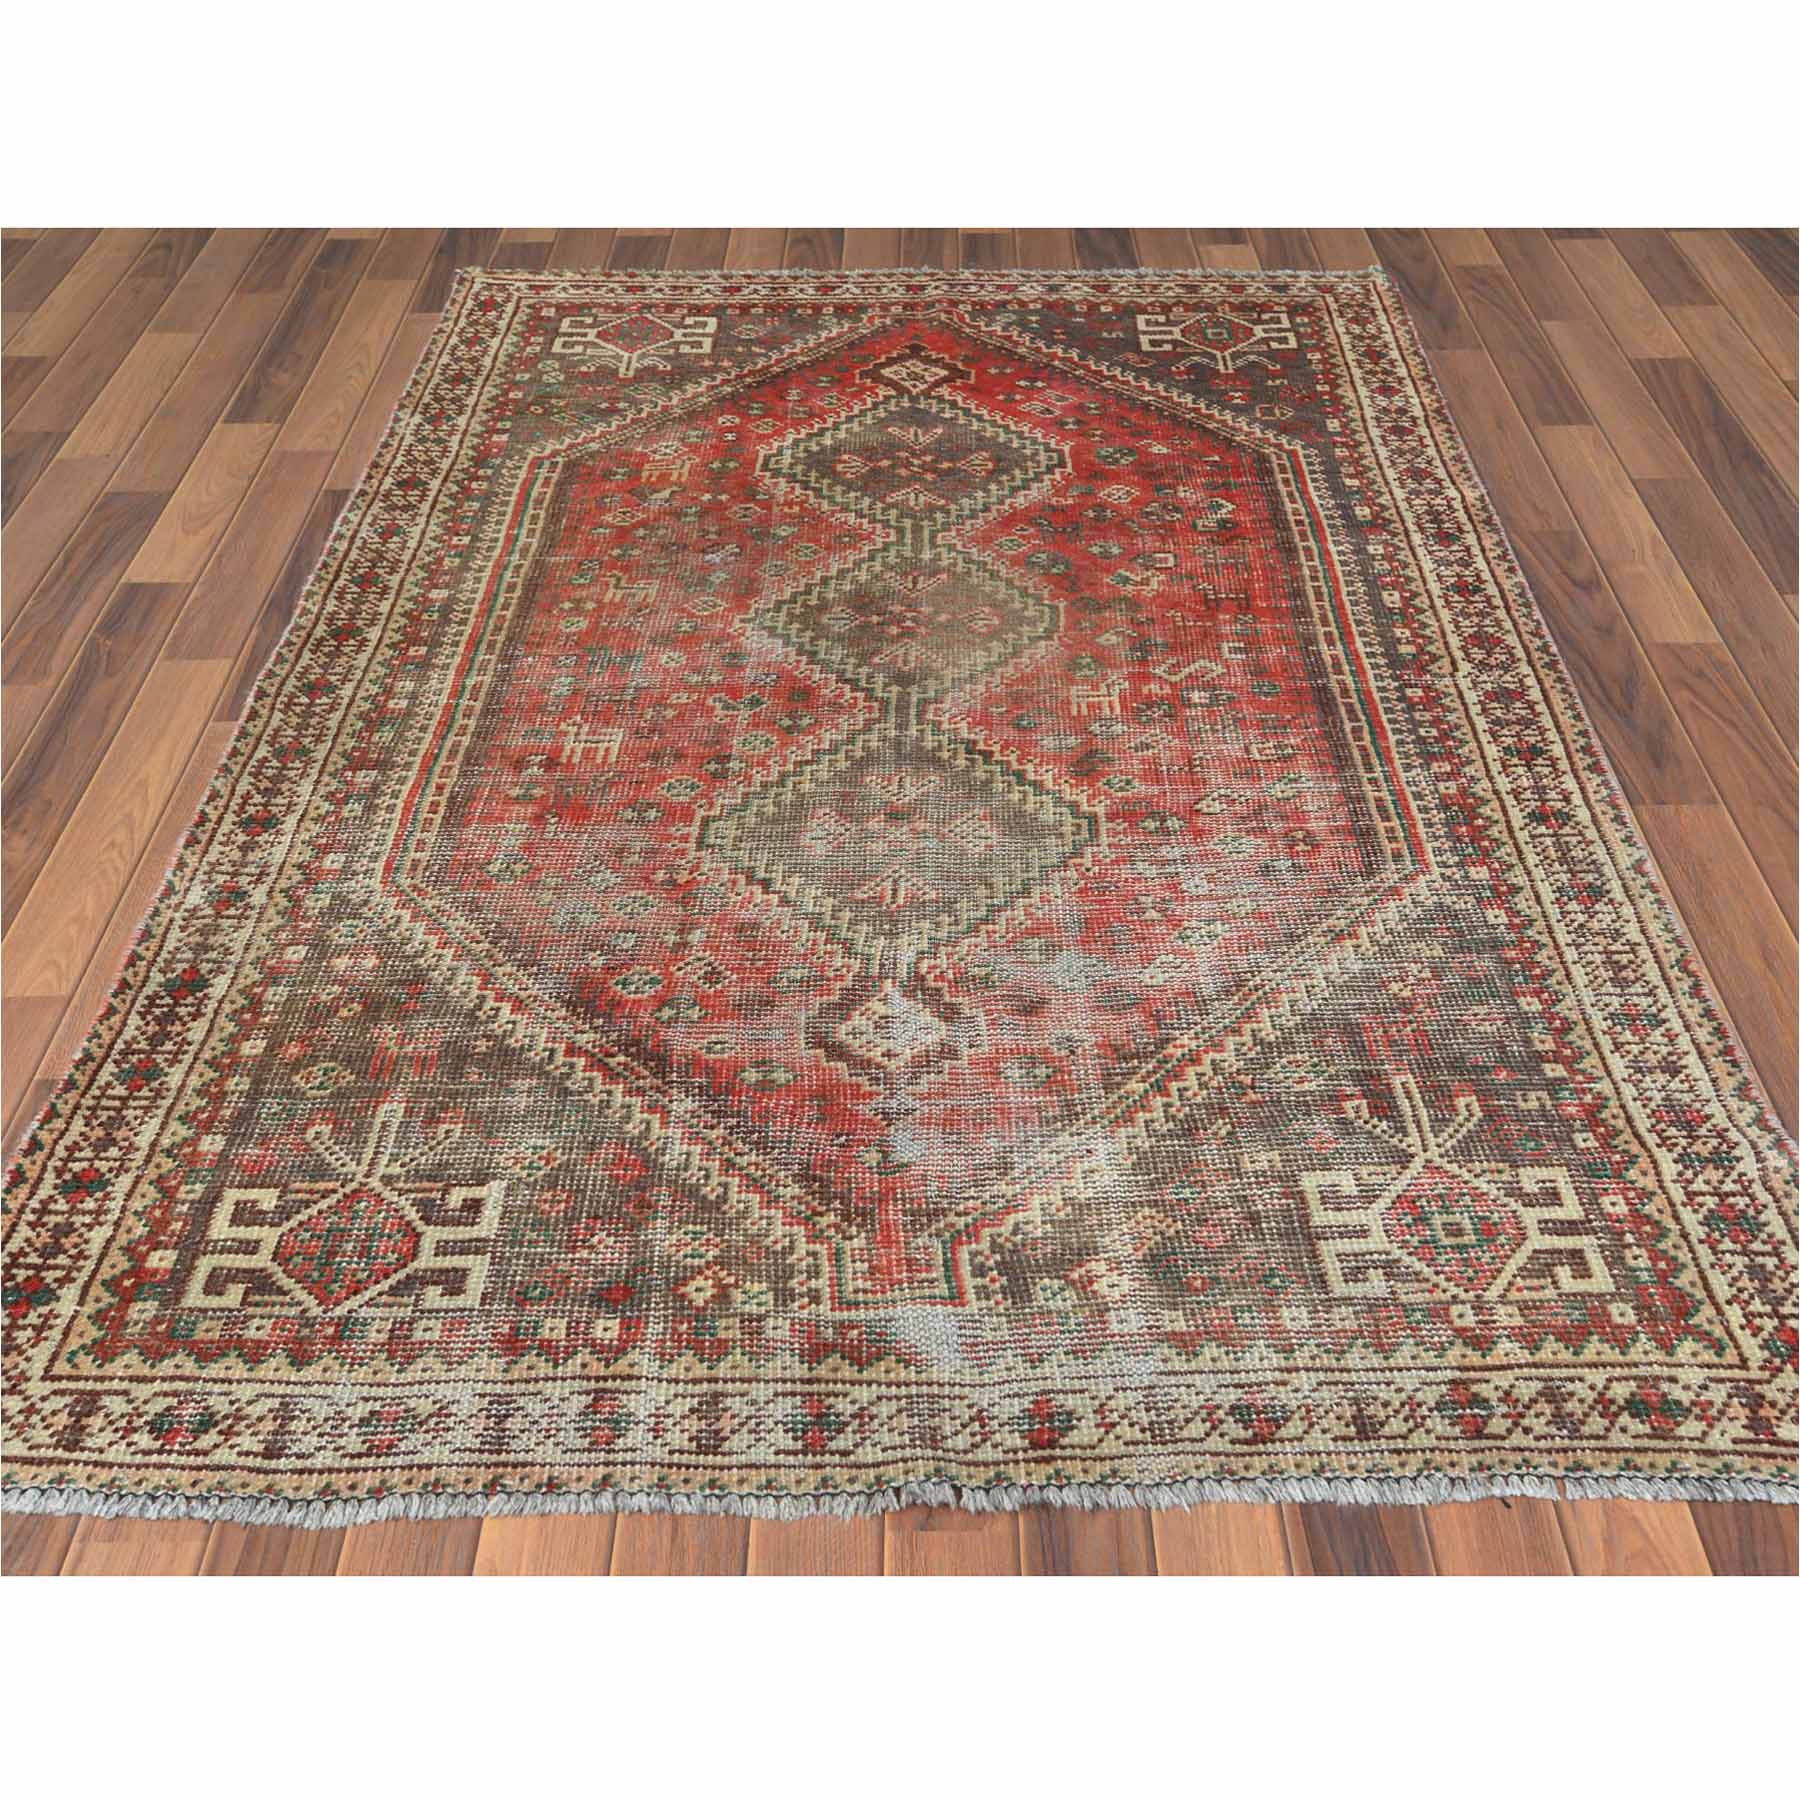 Overdyed-Vintage-Hand-Knotted-Rug-303105